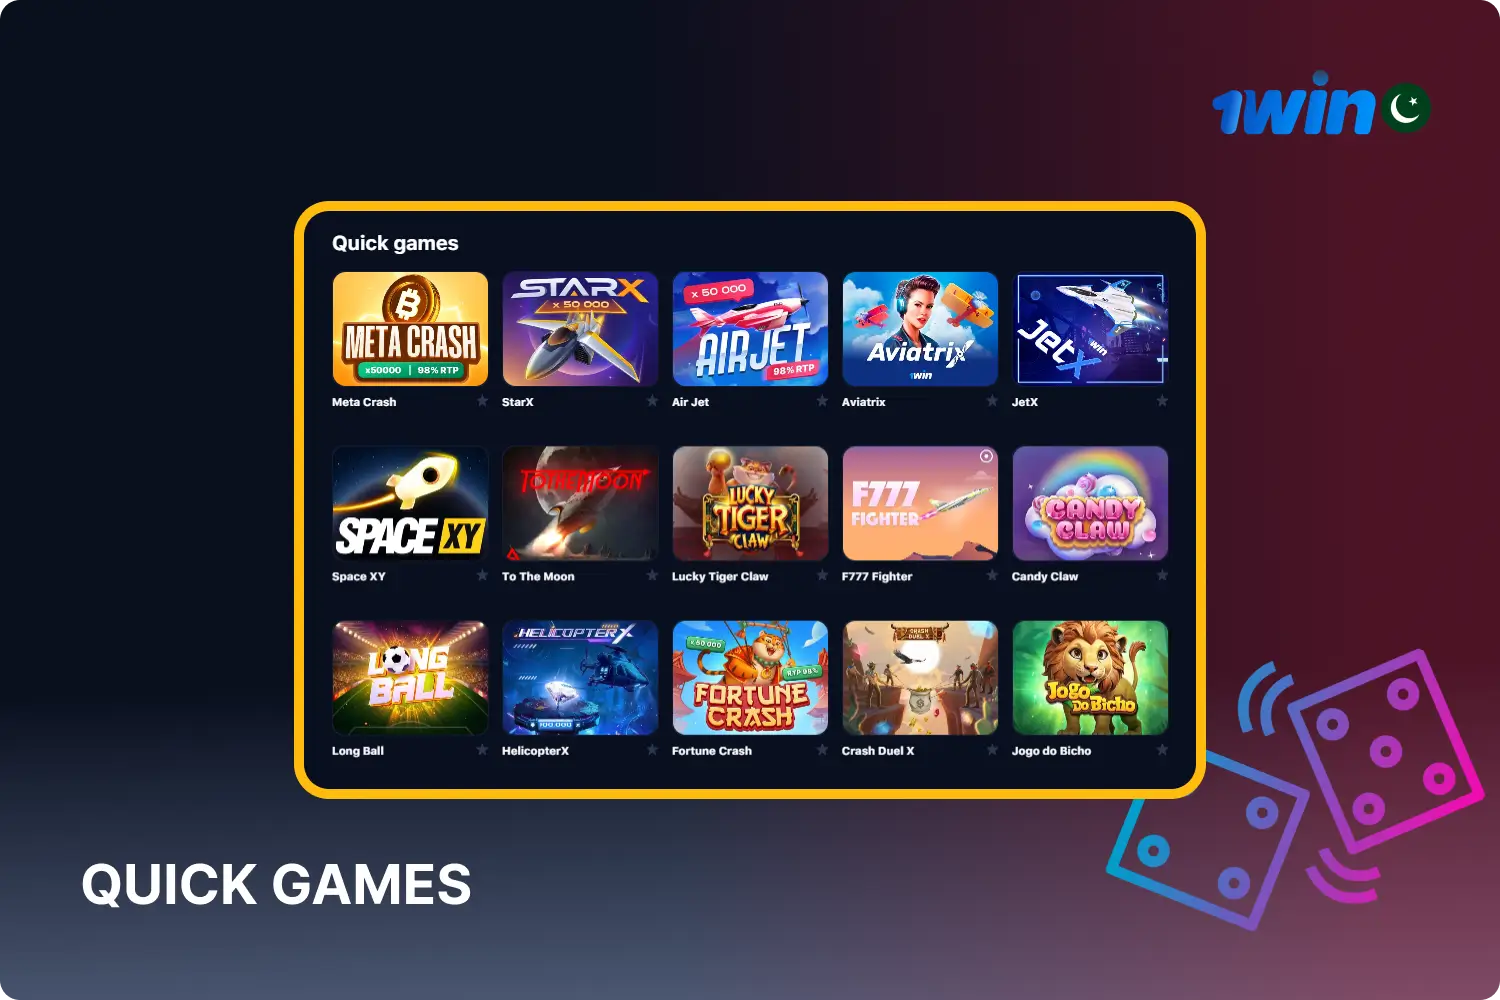 Fans of quick wins will find many games suitable for them on the 1win Quick Games tab